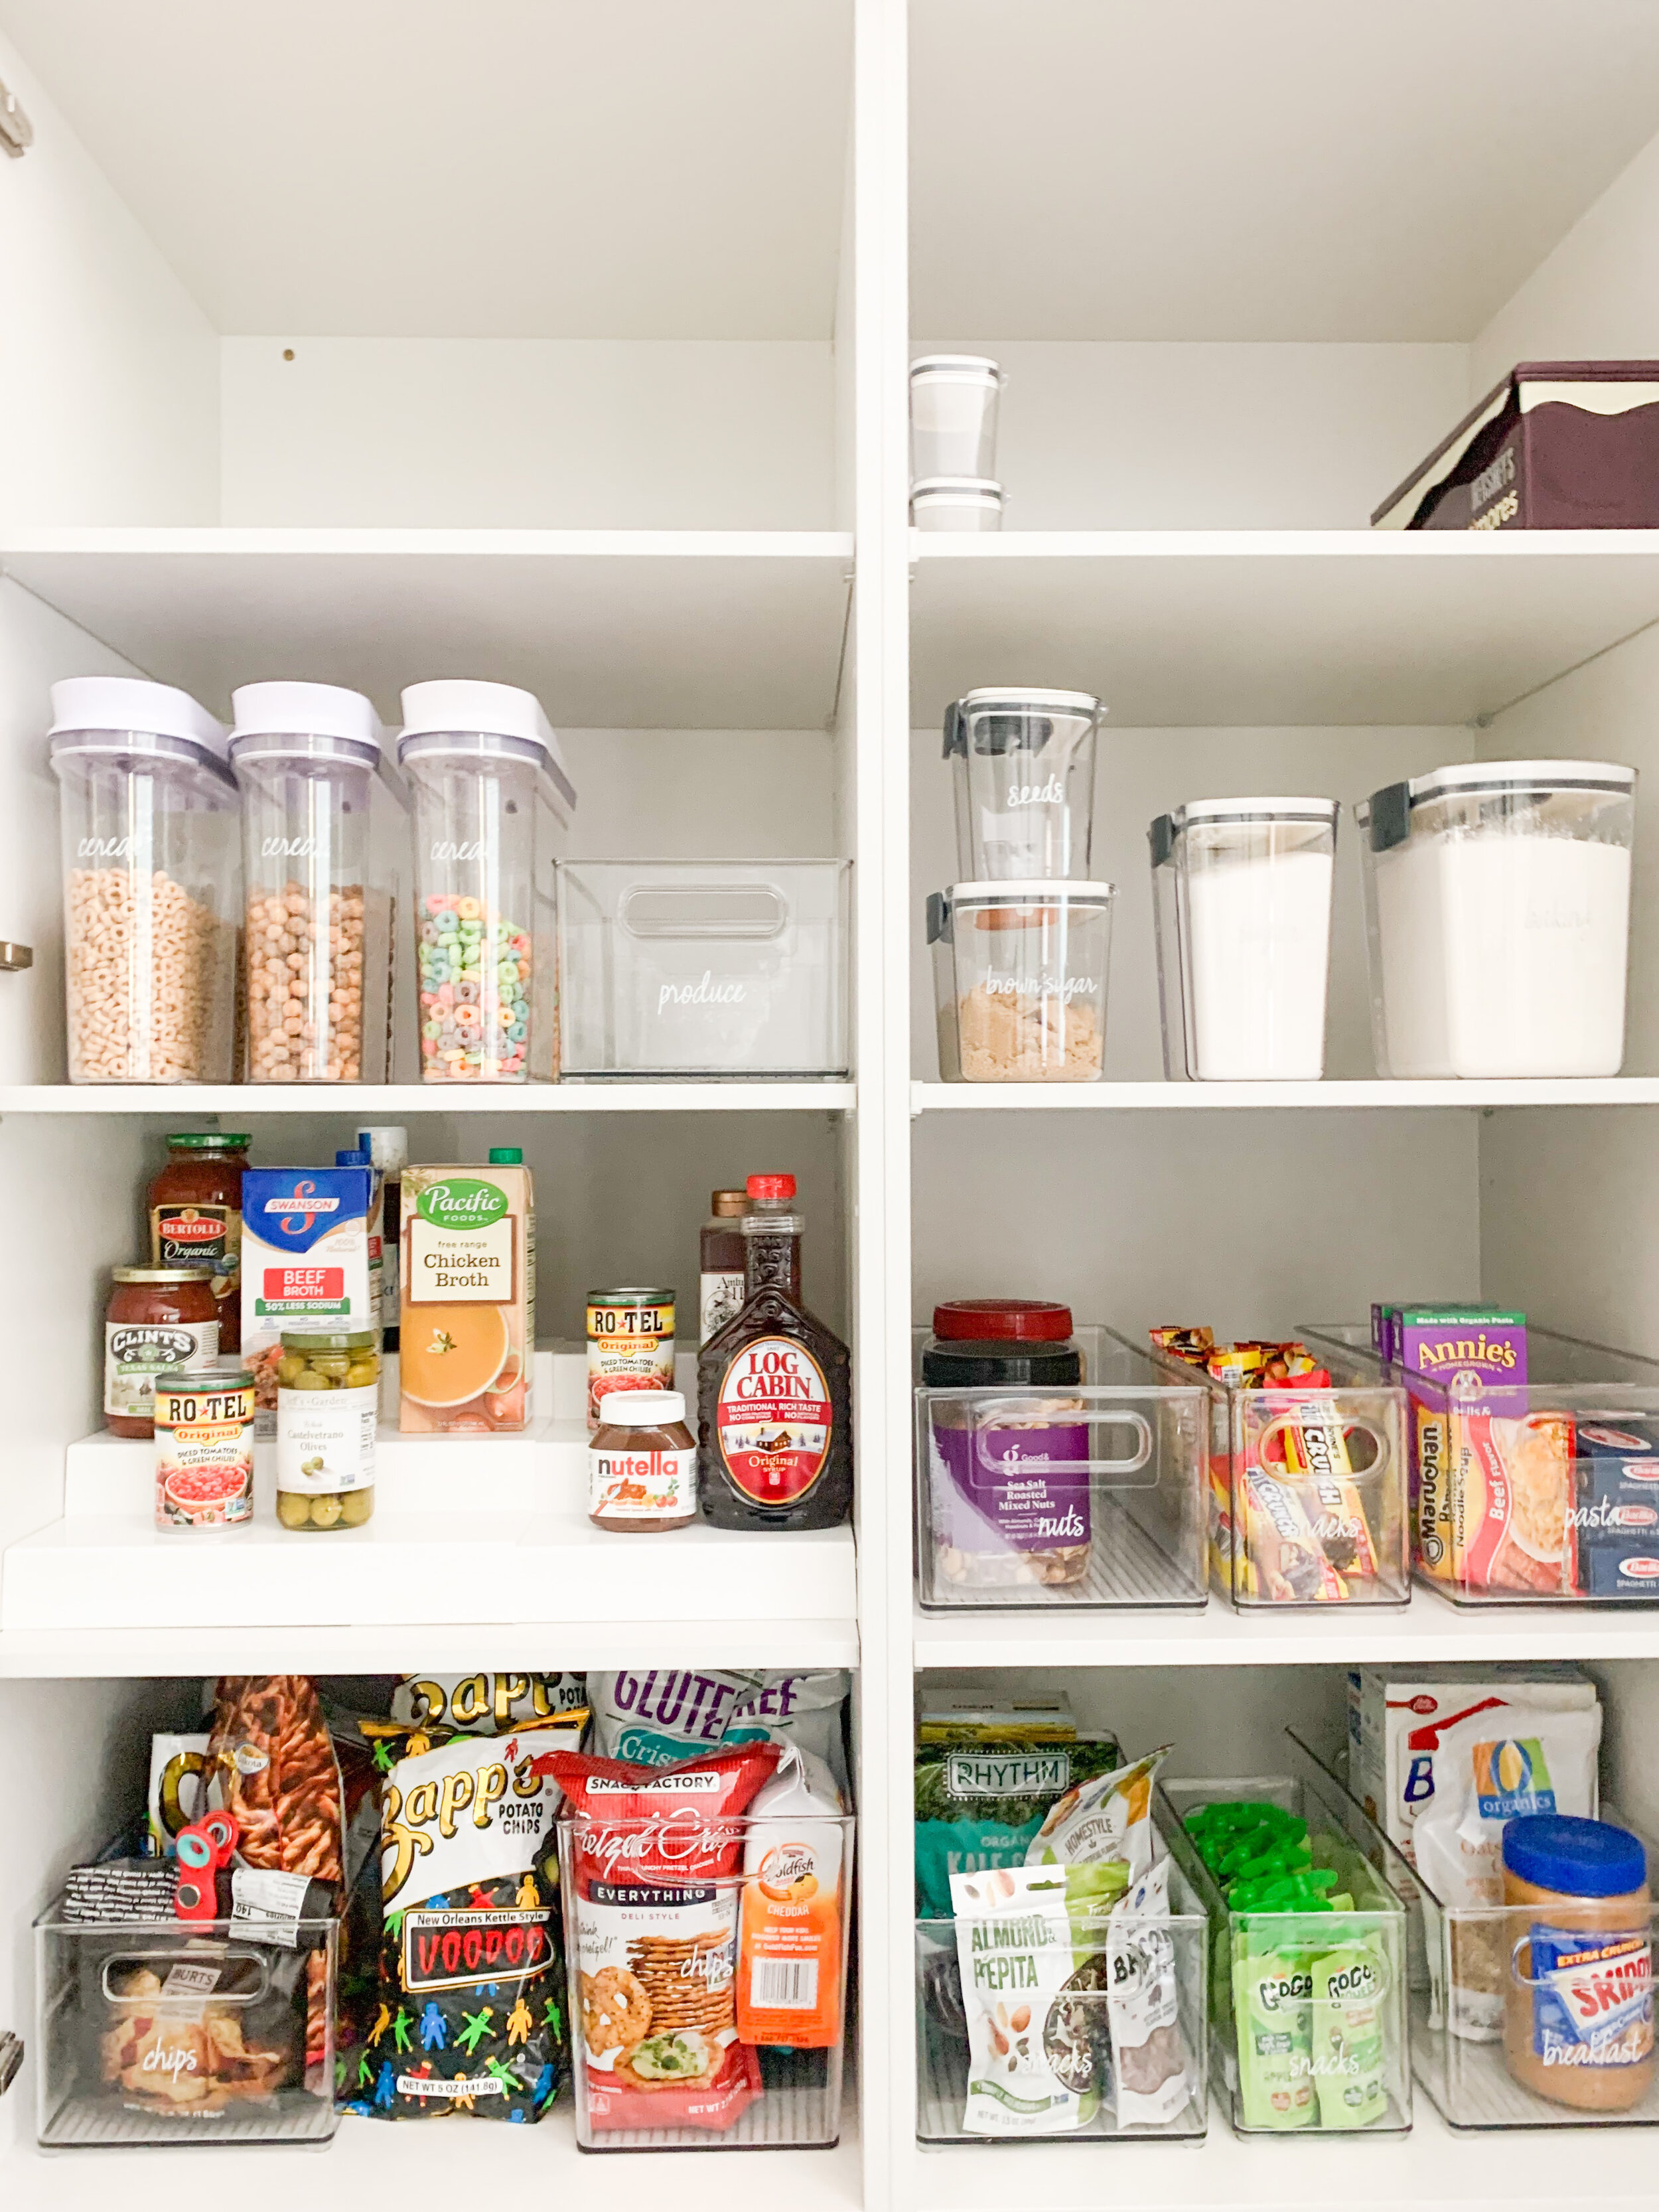 Purging allows for you to actually SEE the items in your pantry, rather than having it overfull!